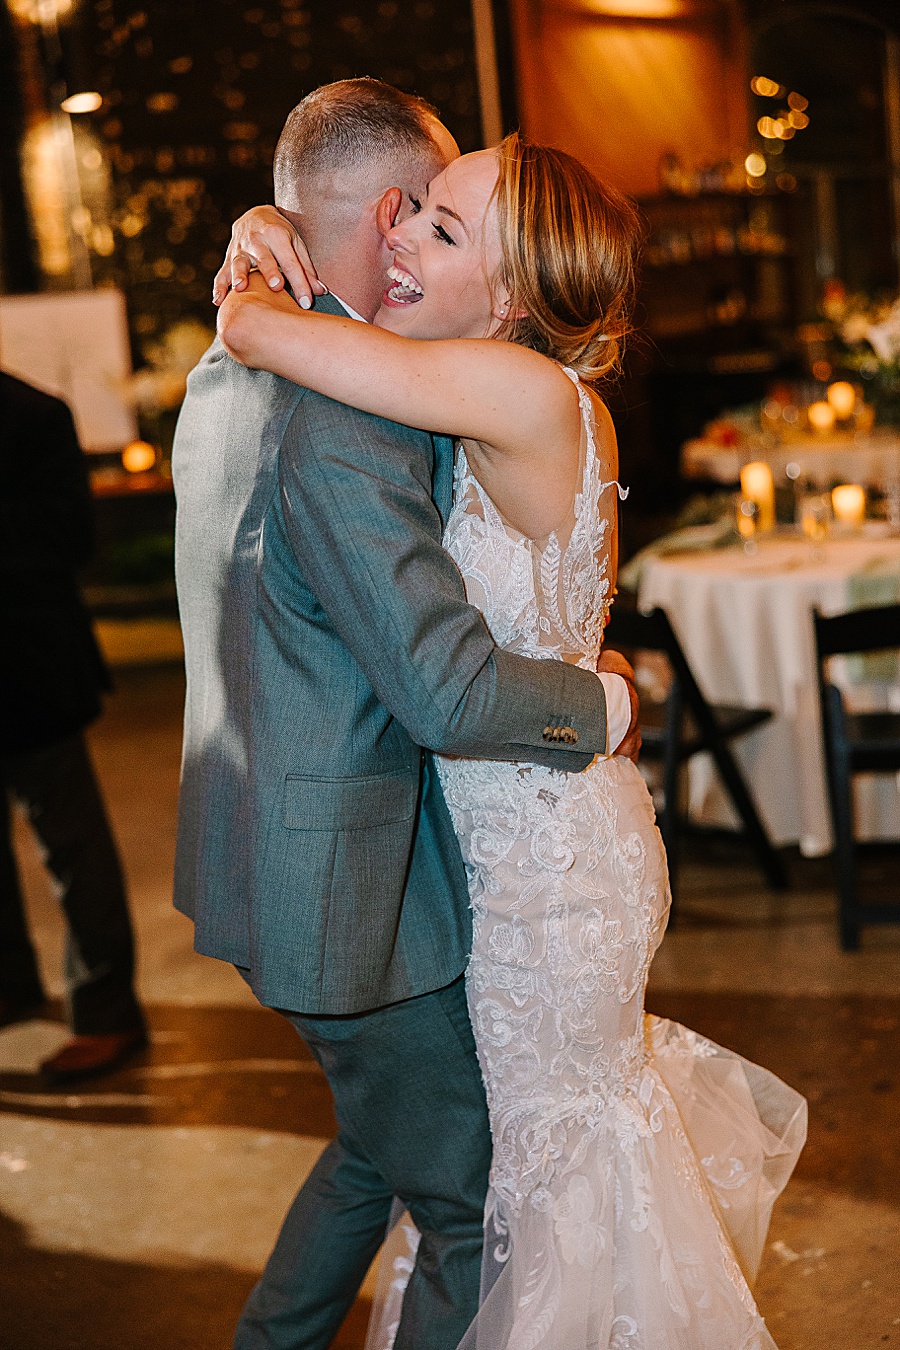 Bride & Groom dancing at reception at Jackson Terminal events wedding in Knoxville TN by Mandy Hart Photo, Knoxville TN Wedding Photographer